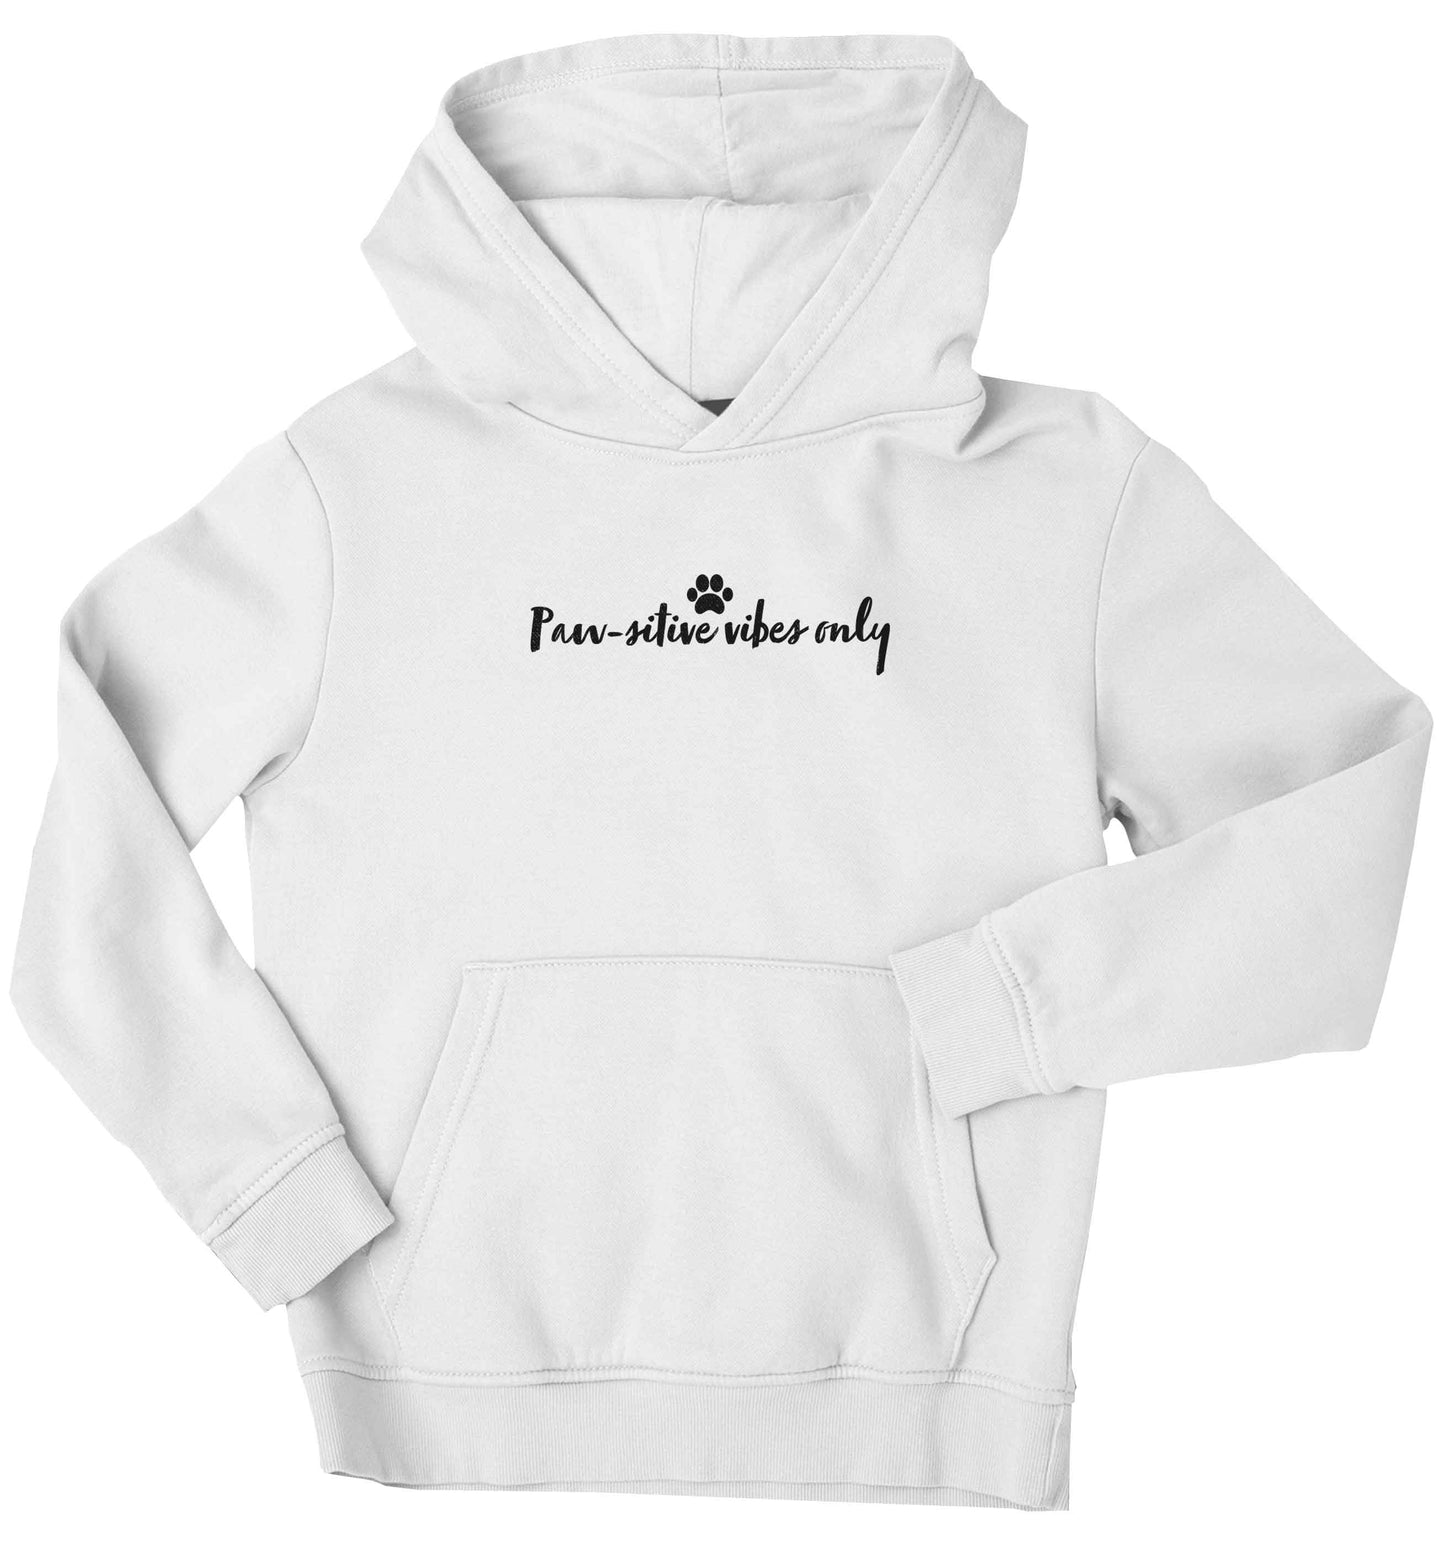 Pawsitive vibes only Kit children's white hoodie 12-13 Years